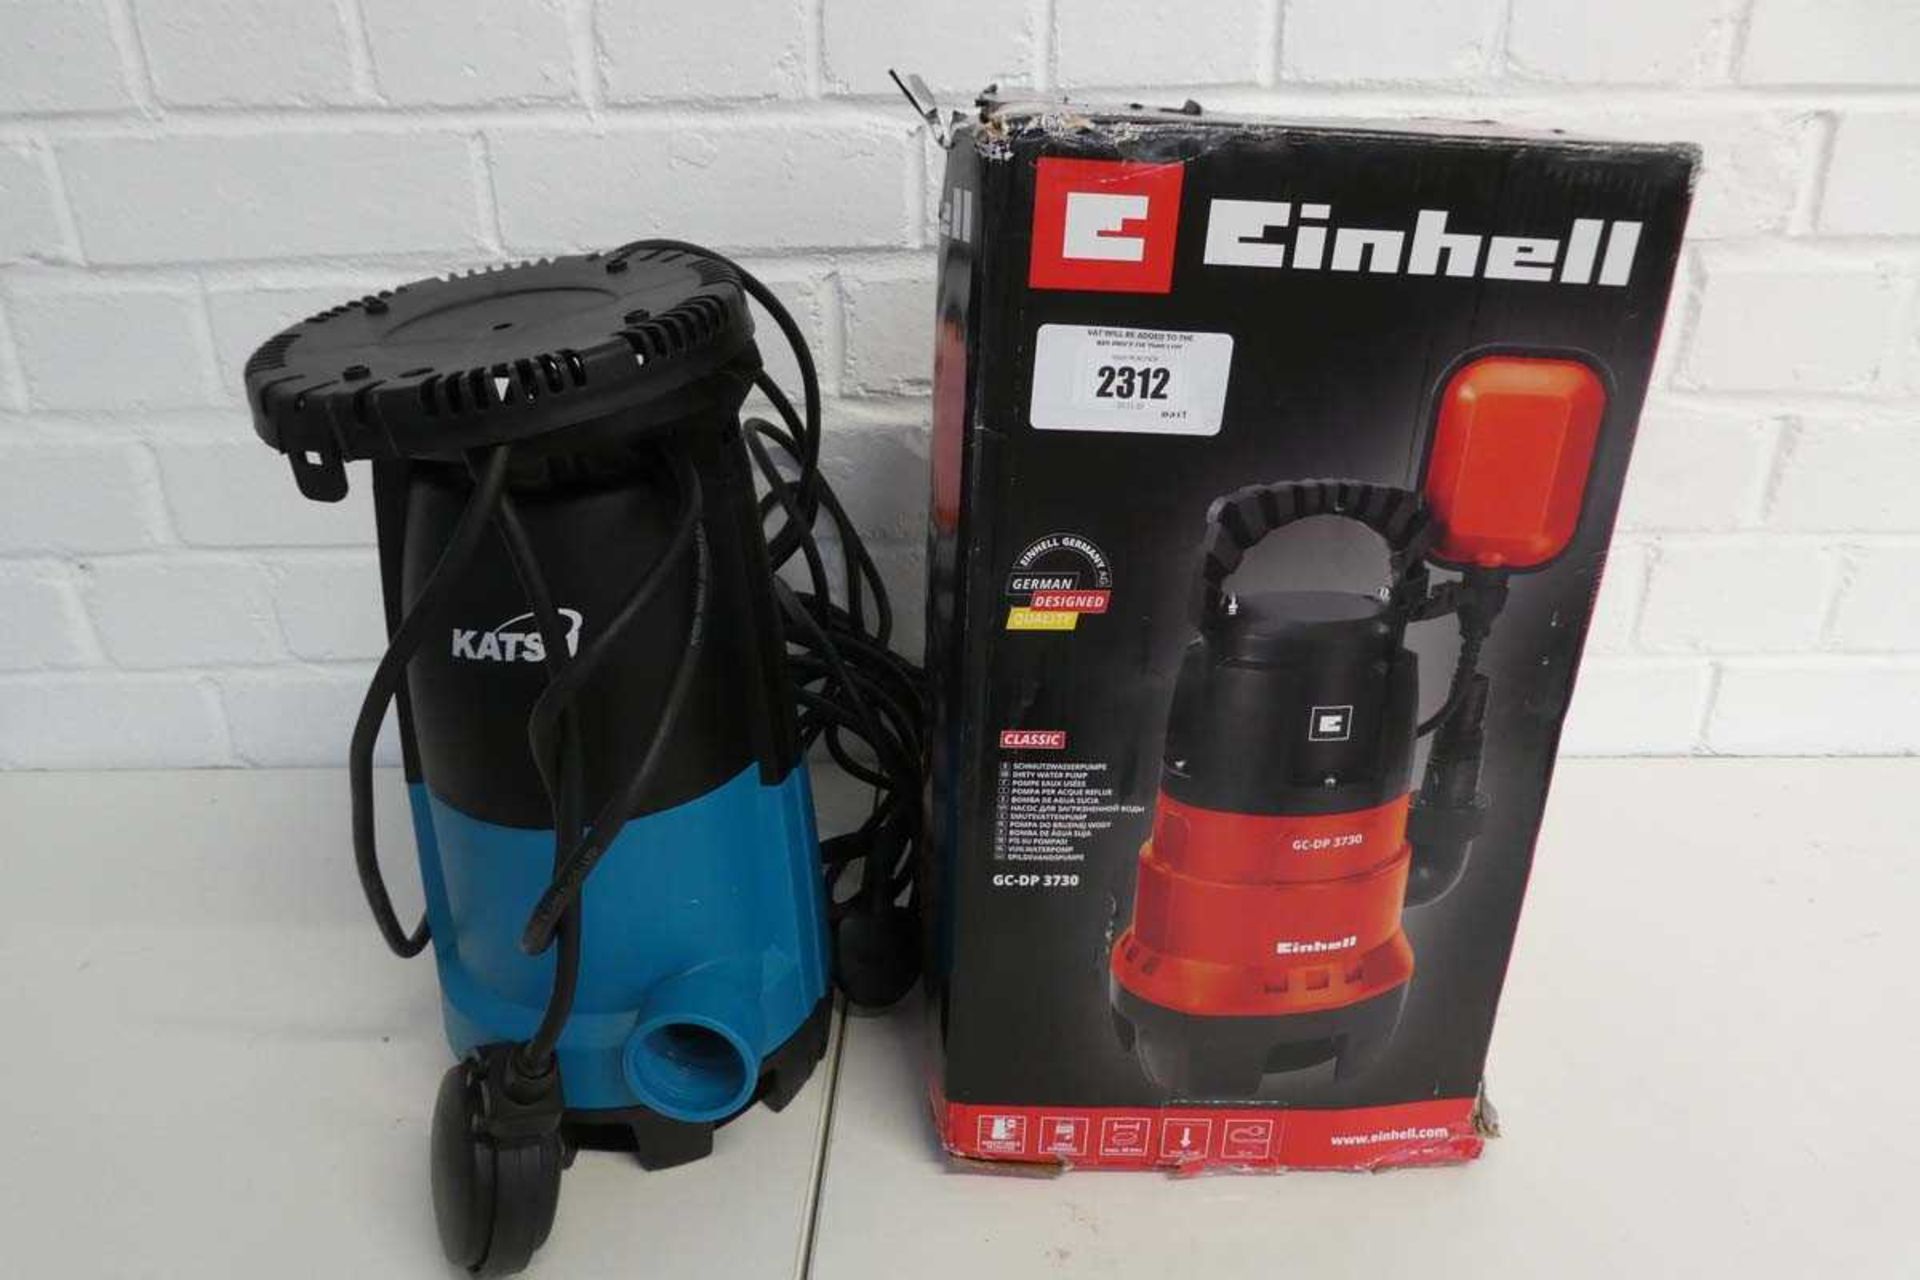 +VAT Boxed Einhell dirty water pump with Katsu submersible pump